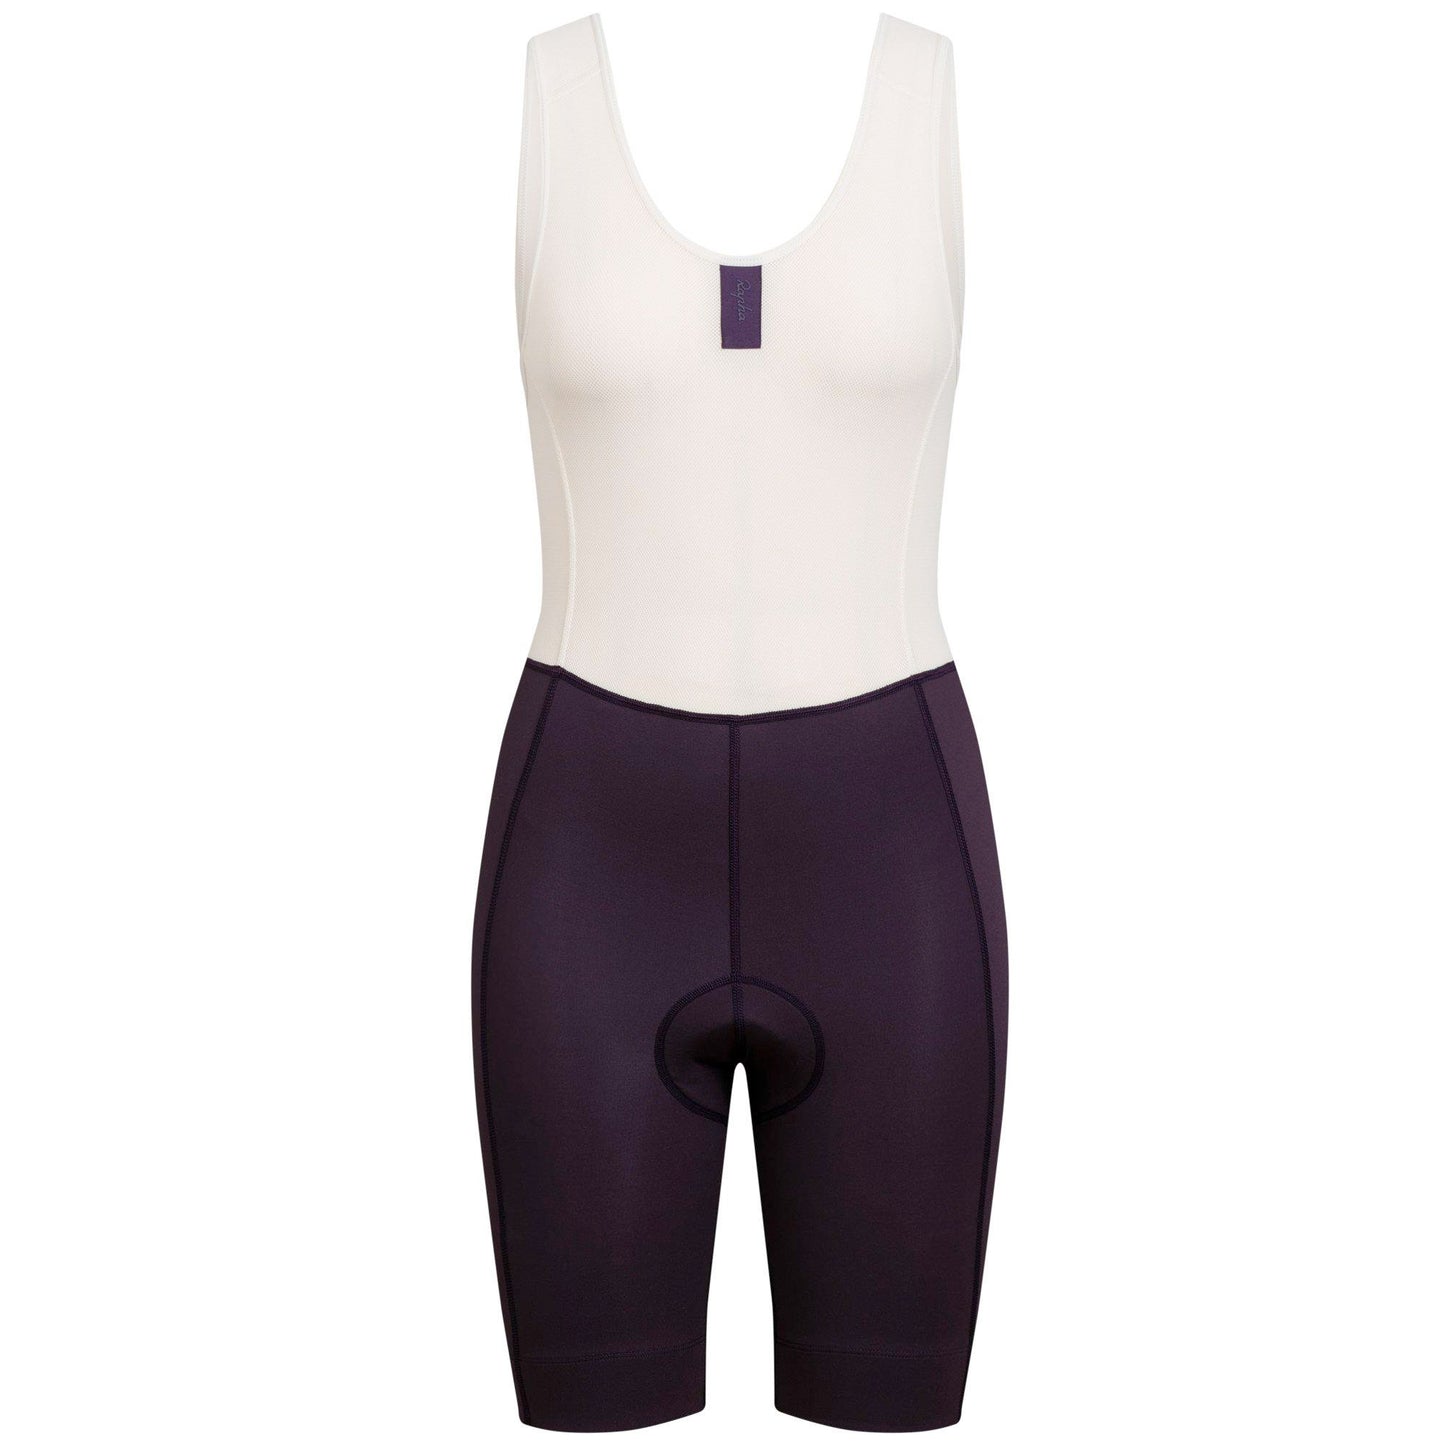 Rapha Women's Classic Bib Shorts - Purple/Off-White buy online at Woolys Wheels Sydney with free delivery